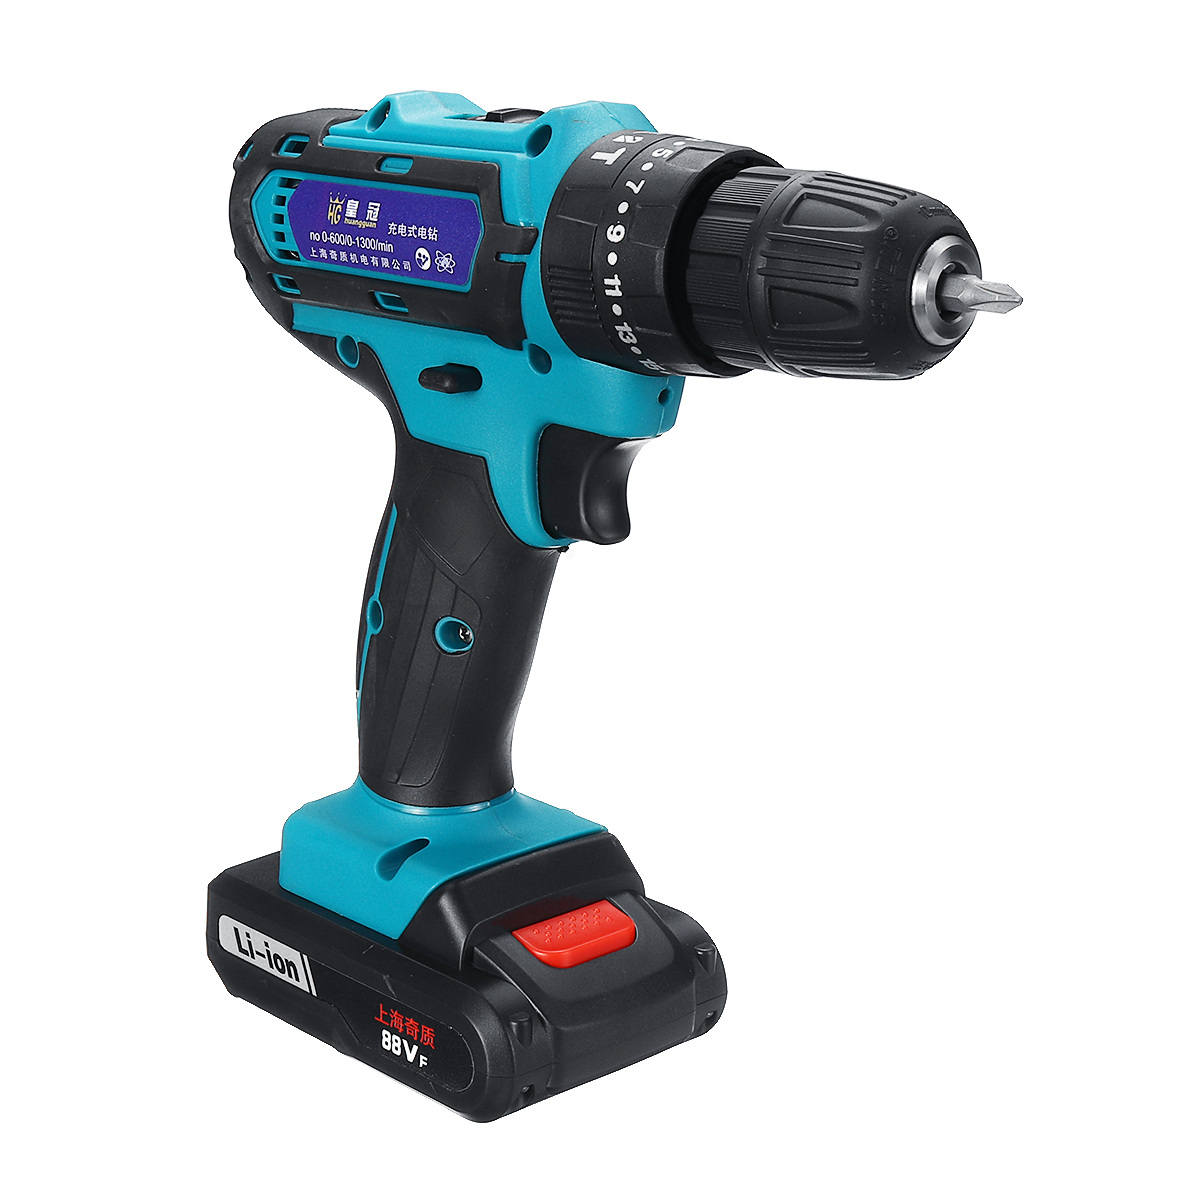 

Drillpro 88VF Cordless Electric Impact Drill Li-ion Battery Rechargeable 25+3 Torque Screwdriver Bit